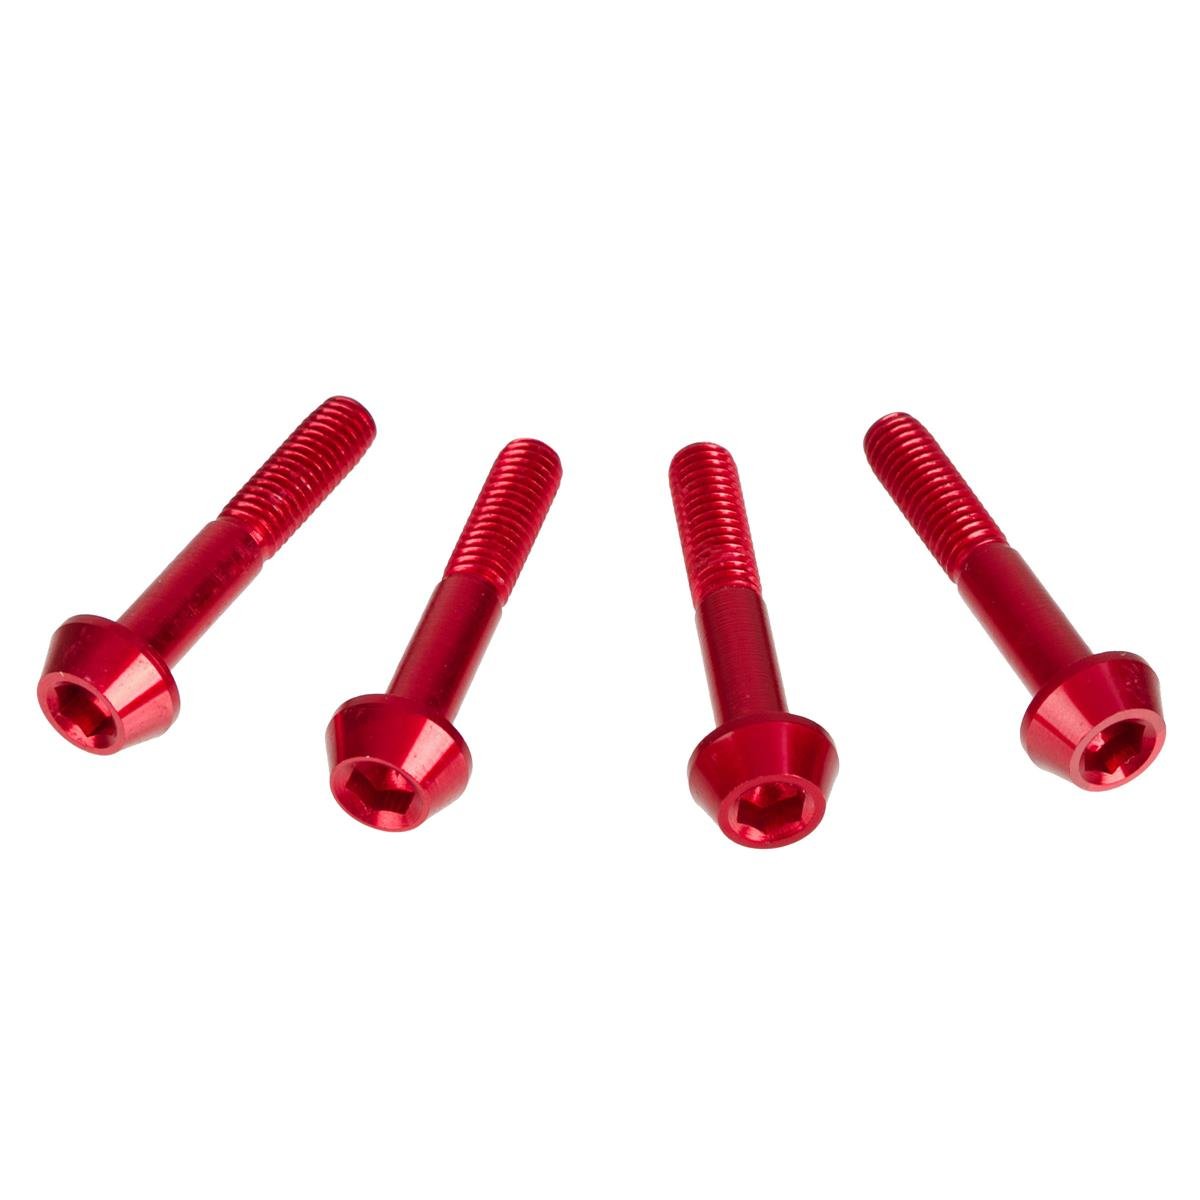 DRC Inner Hex Bolts  M6 x 35 mm, Red, Pack of 4